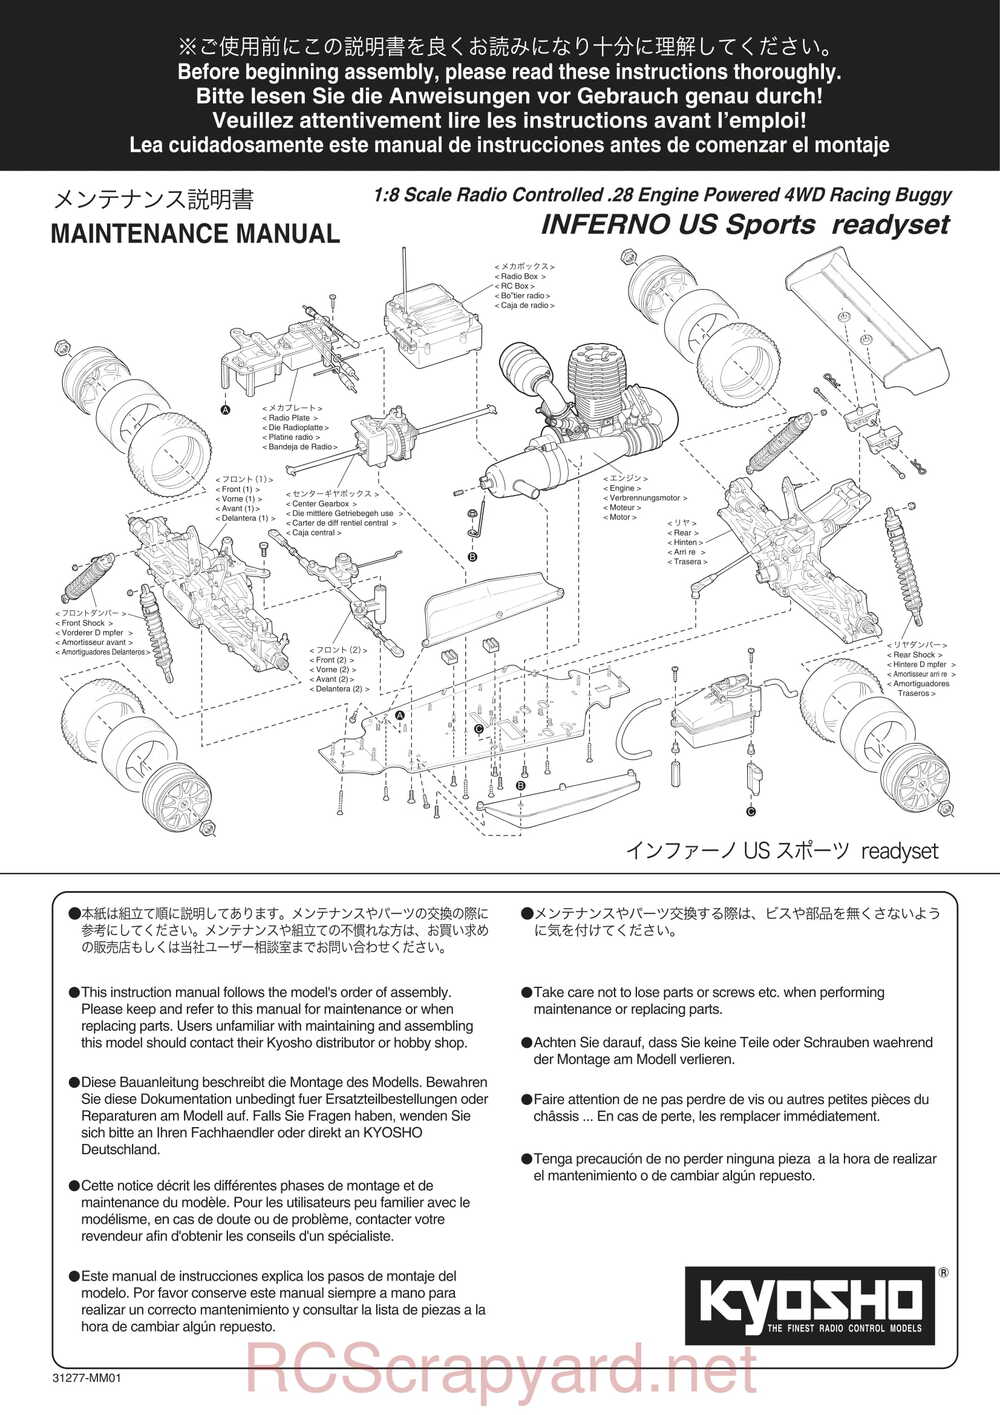 Kyosho - 31277 - Inferno-US-Sports-RS - Manual - Page 01